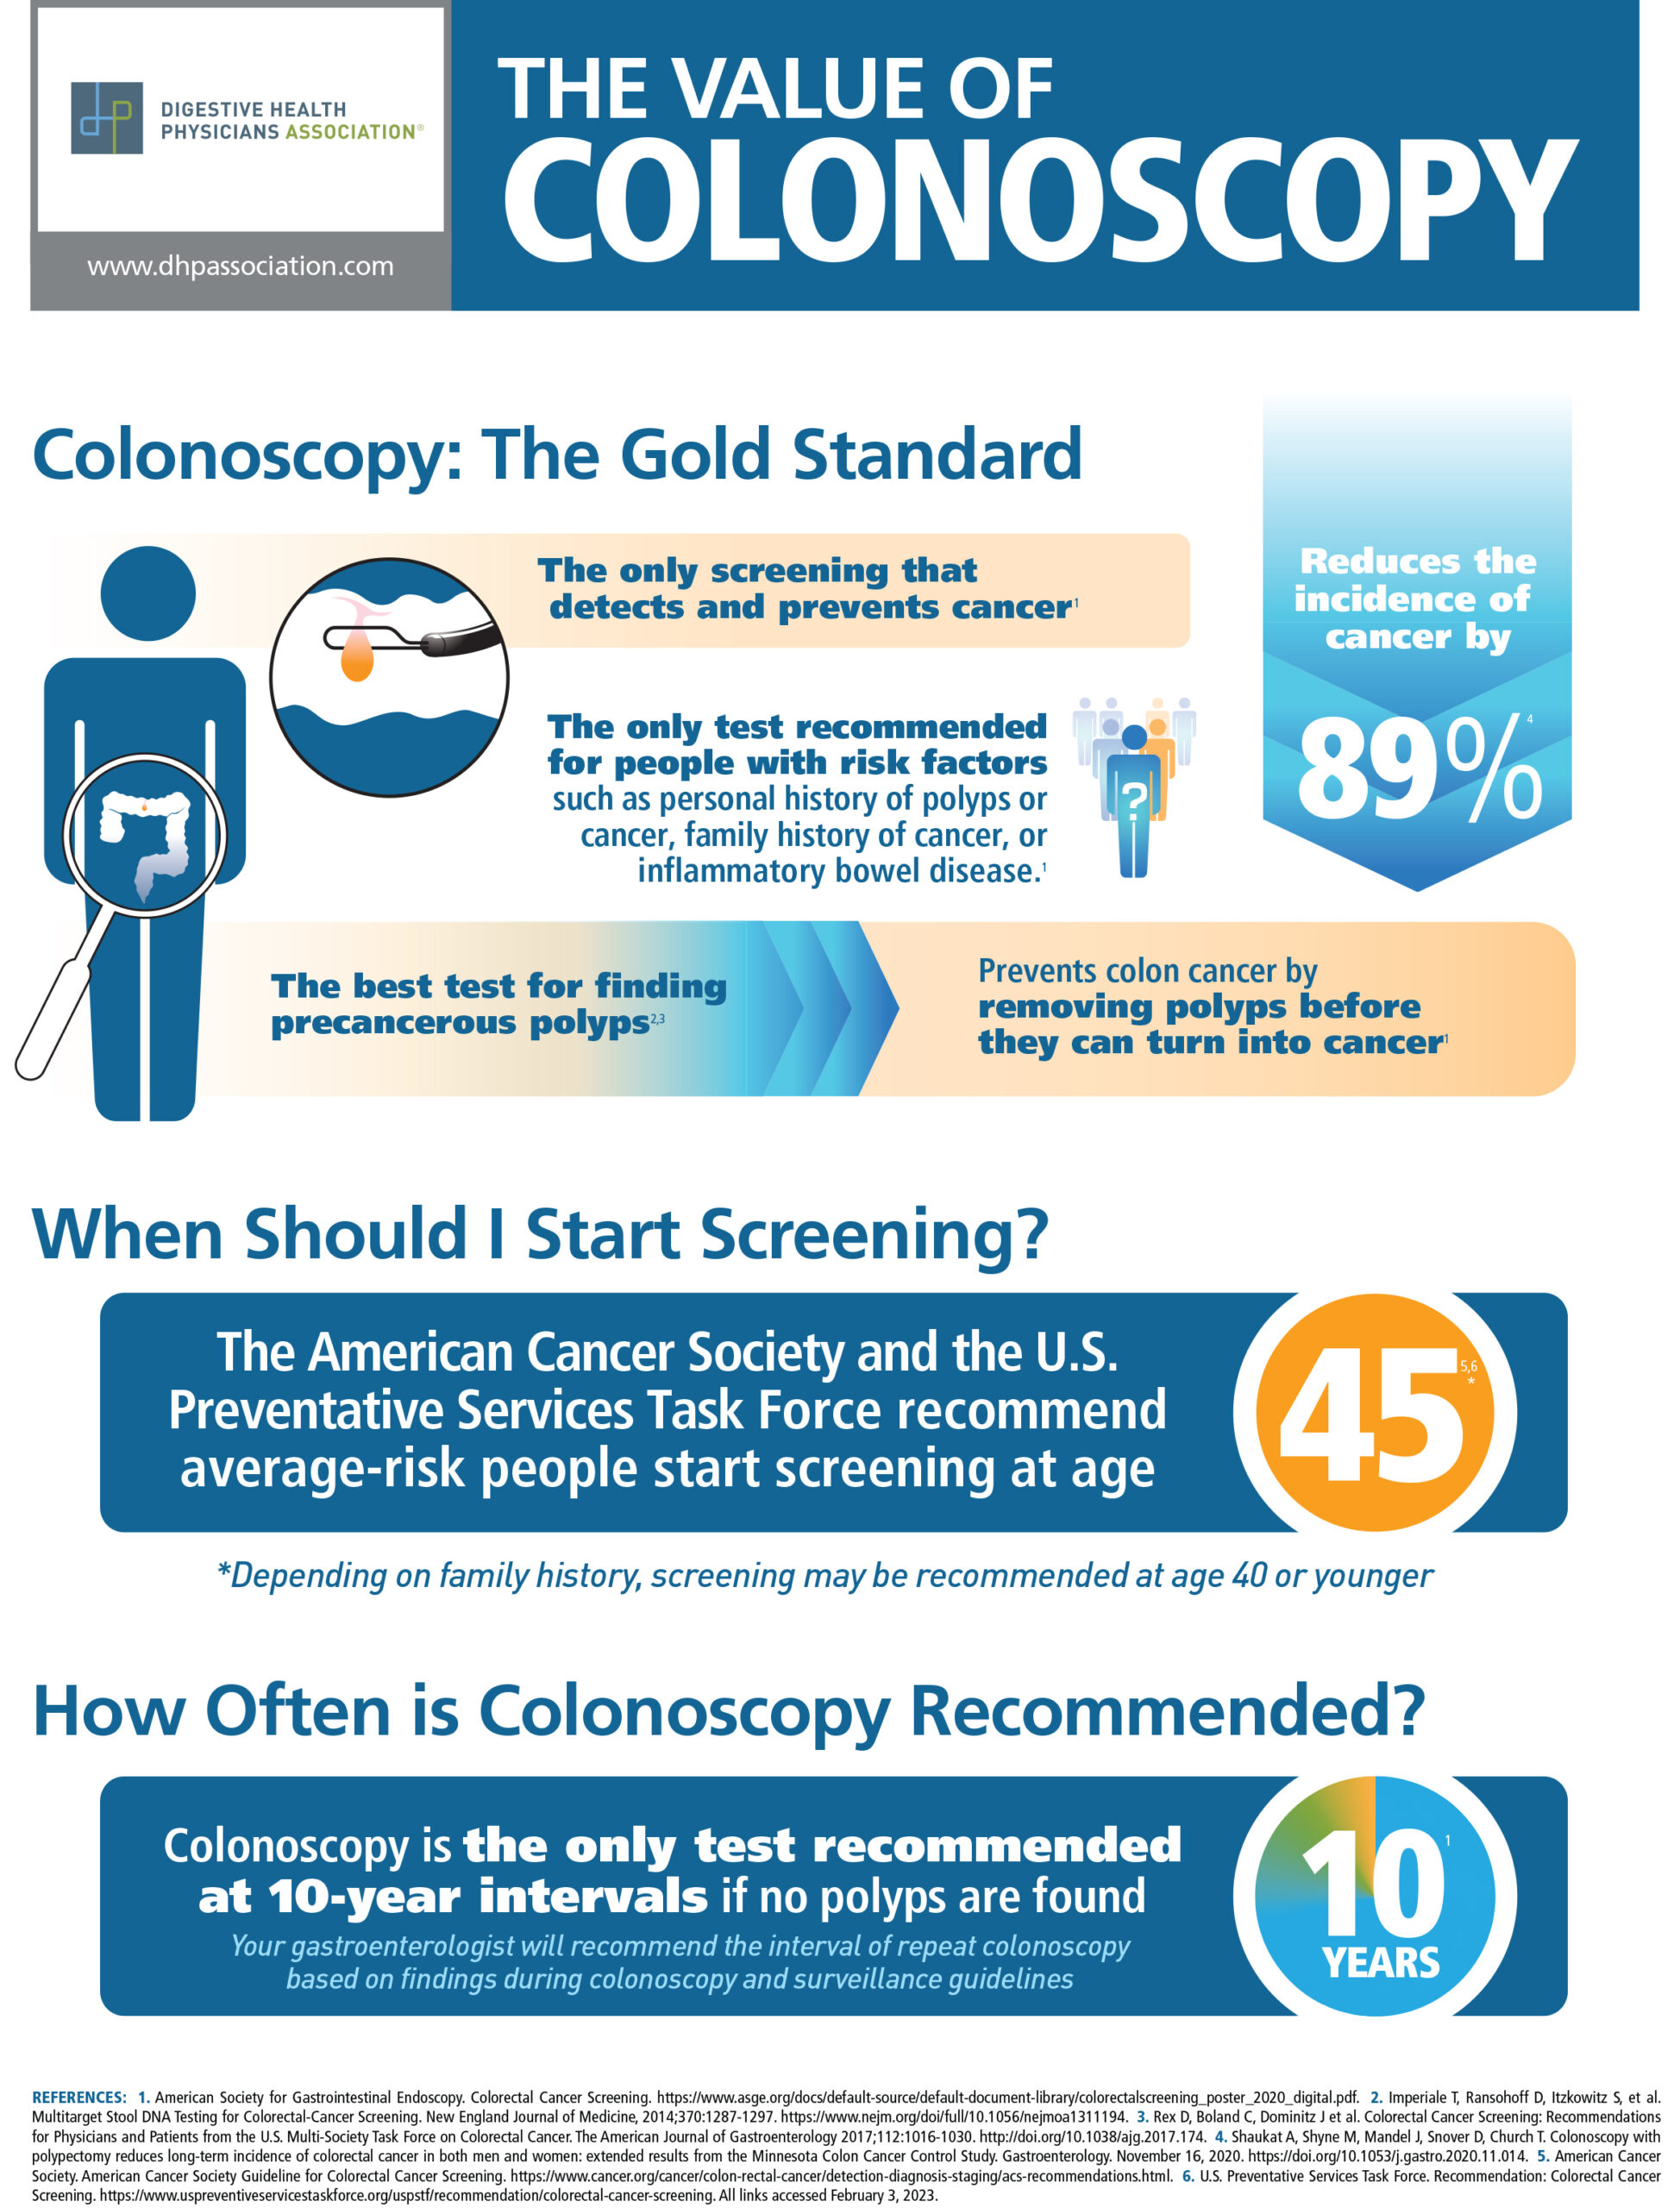 The Value of Colonoscopy (Infographic) DHPA